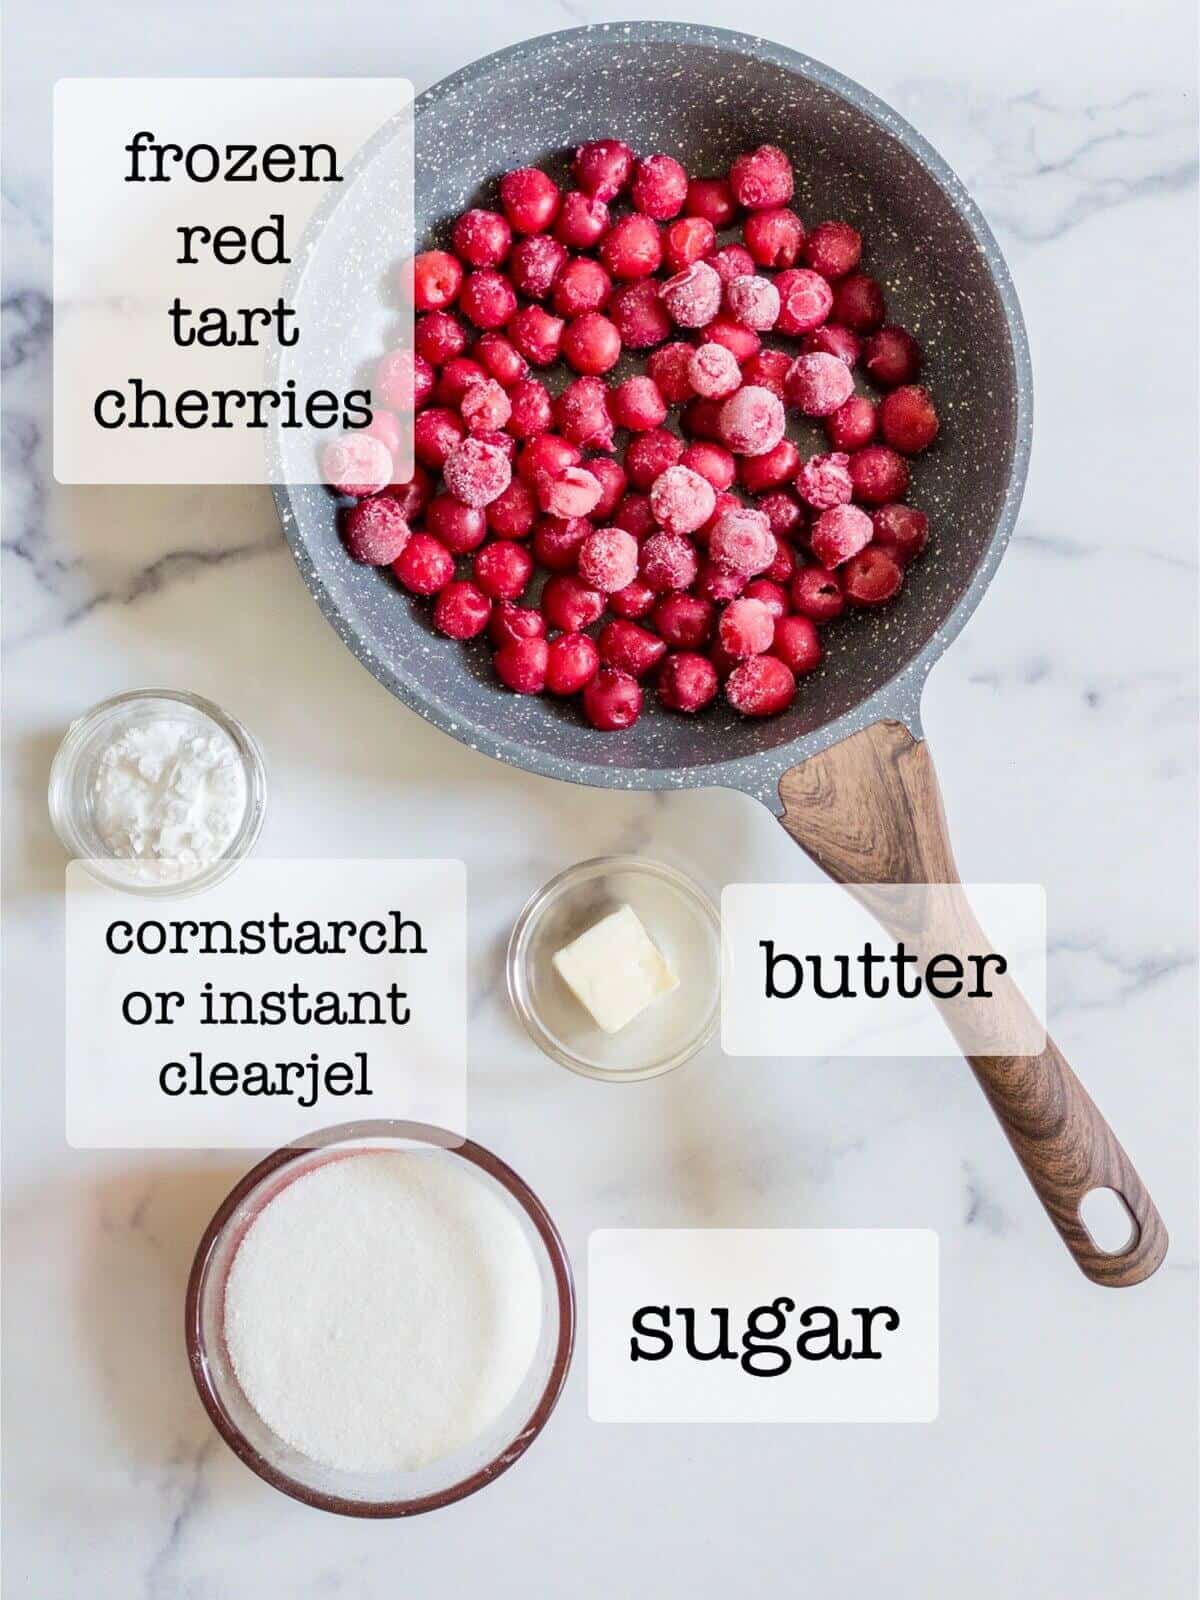 An overhead shot of cherry filling ingredients-frozen tart red cherries, sugar, instant clearjel or cornstarch, and butter